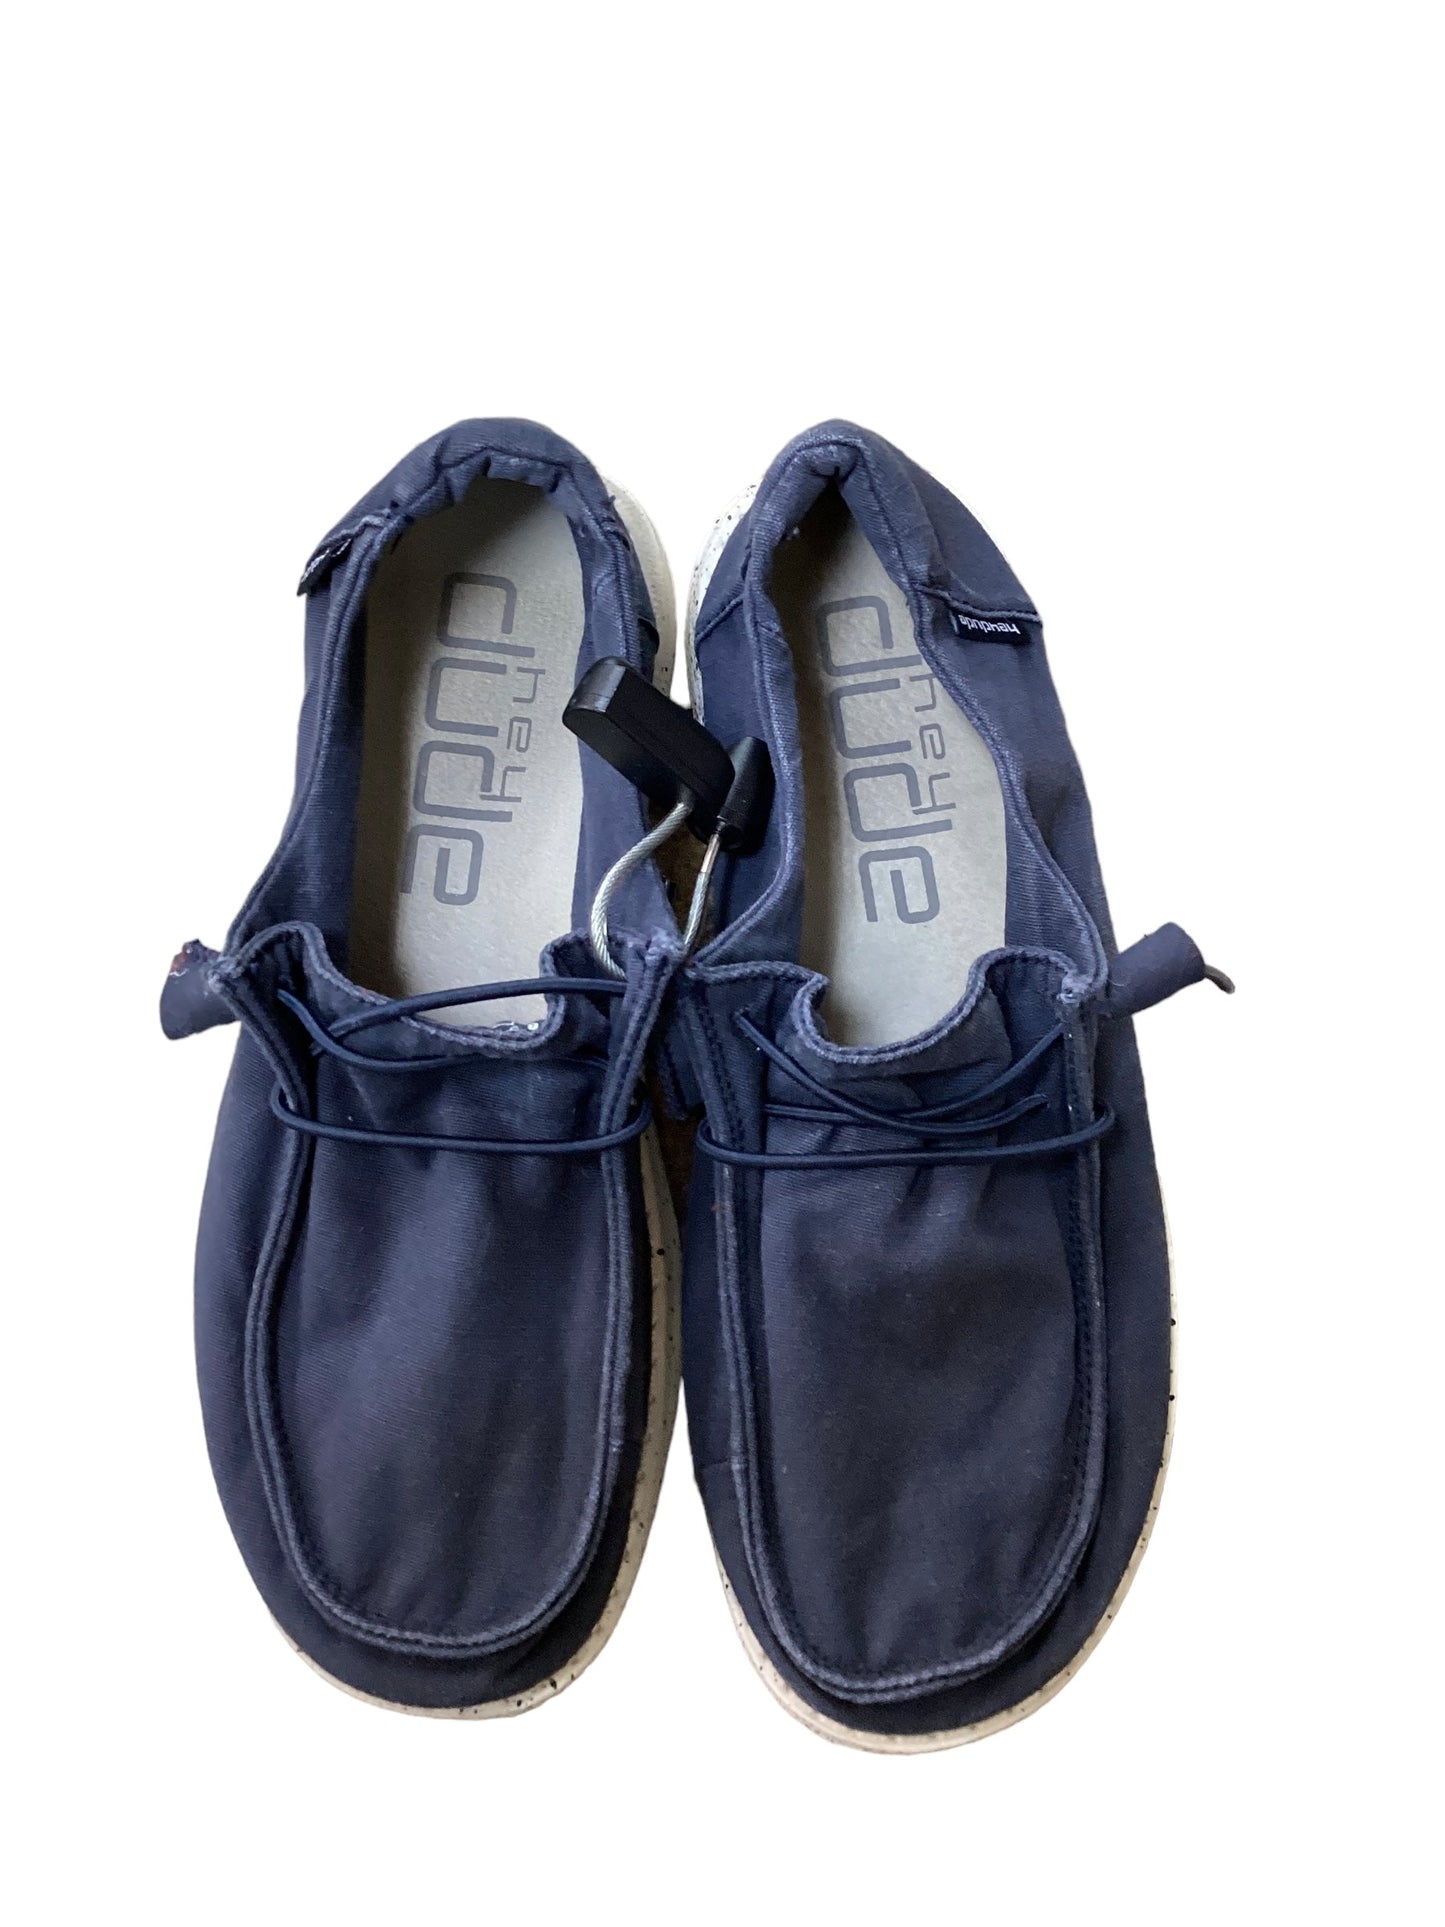 Navy Shoes Flats Hey Dude, Size 6